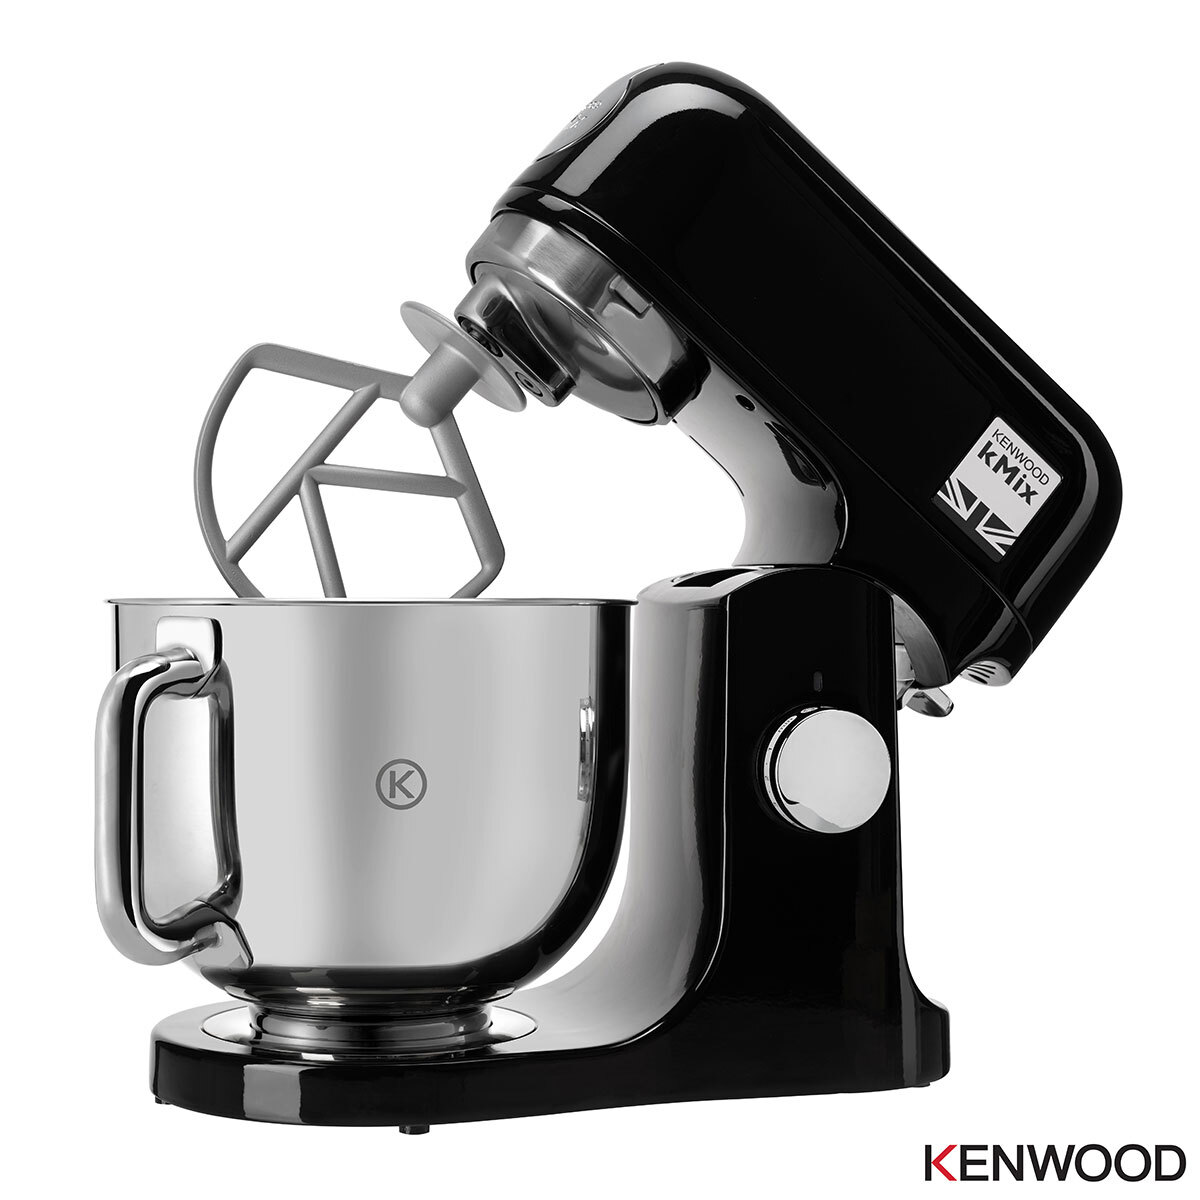 White background photo of stand mixer